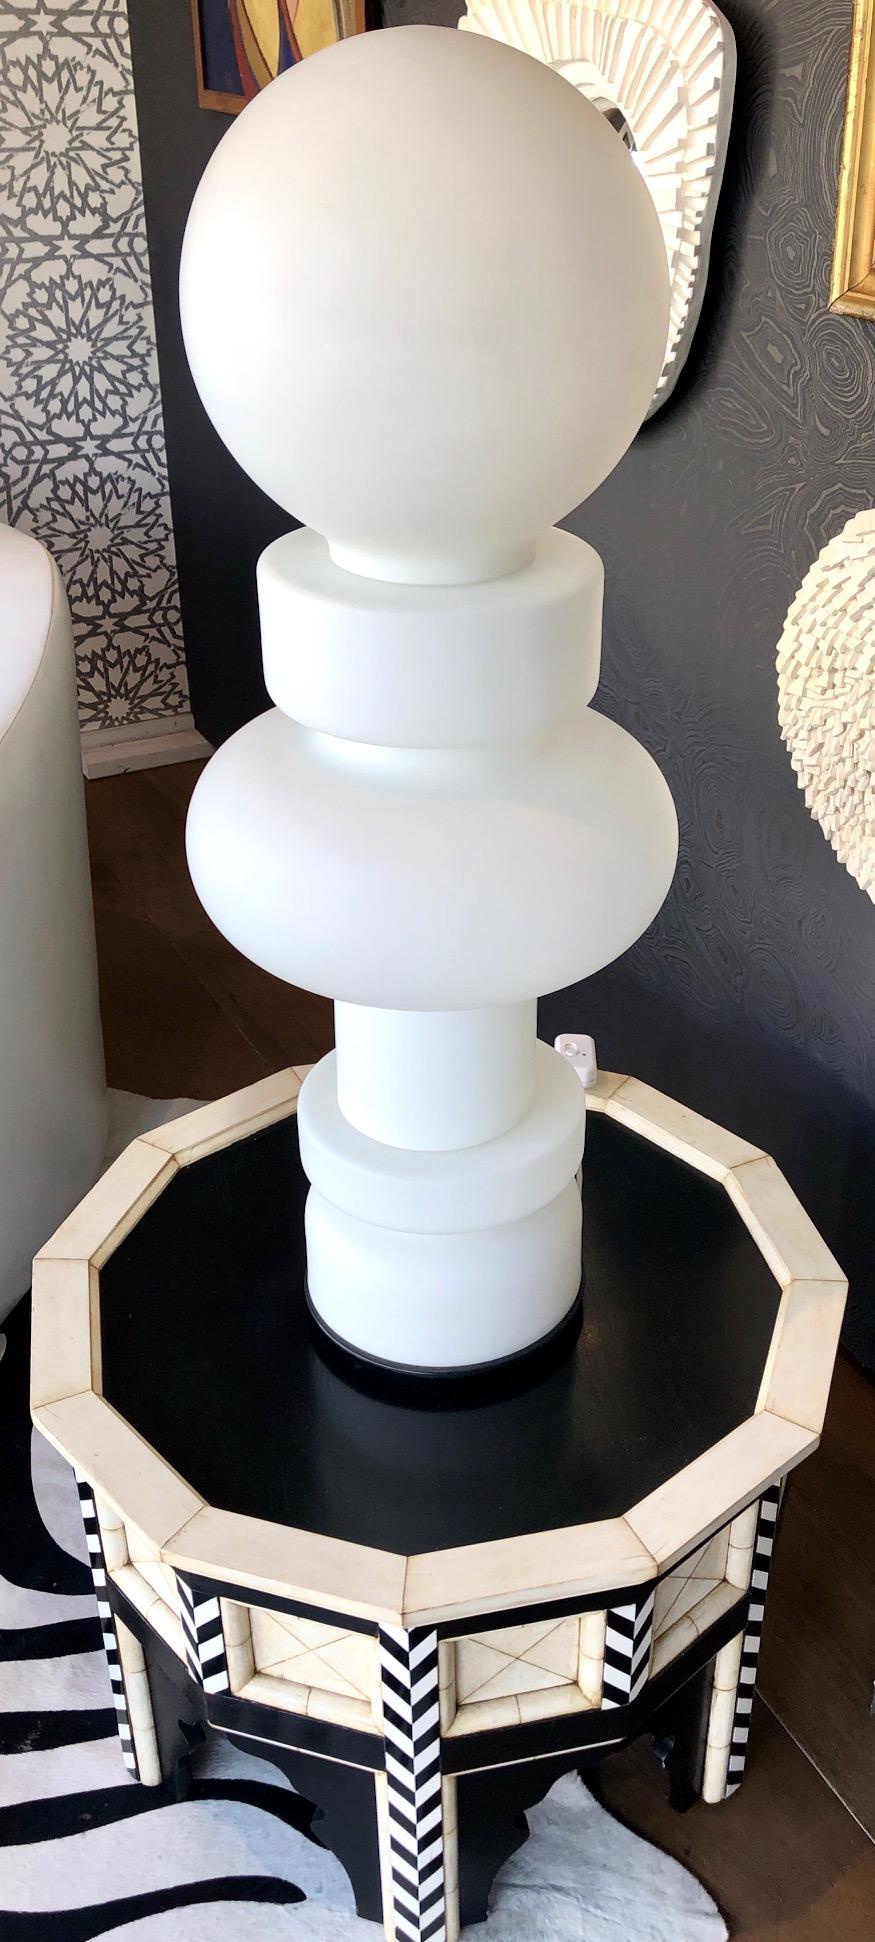 Impressive scaled mid-height floor or table lamp comprised of three pieces o milky-white glass. Designed by artist and theorist Bobo Piccoli. 
